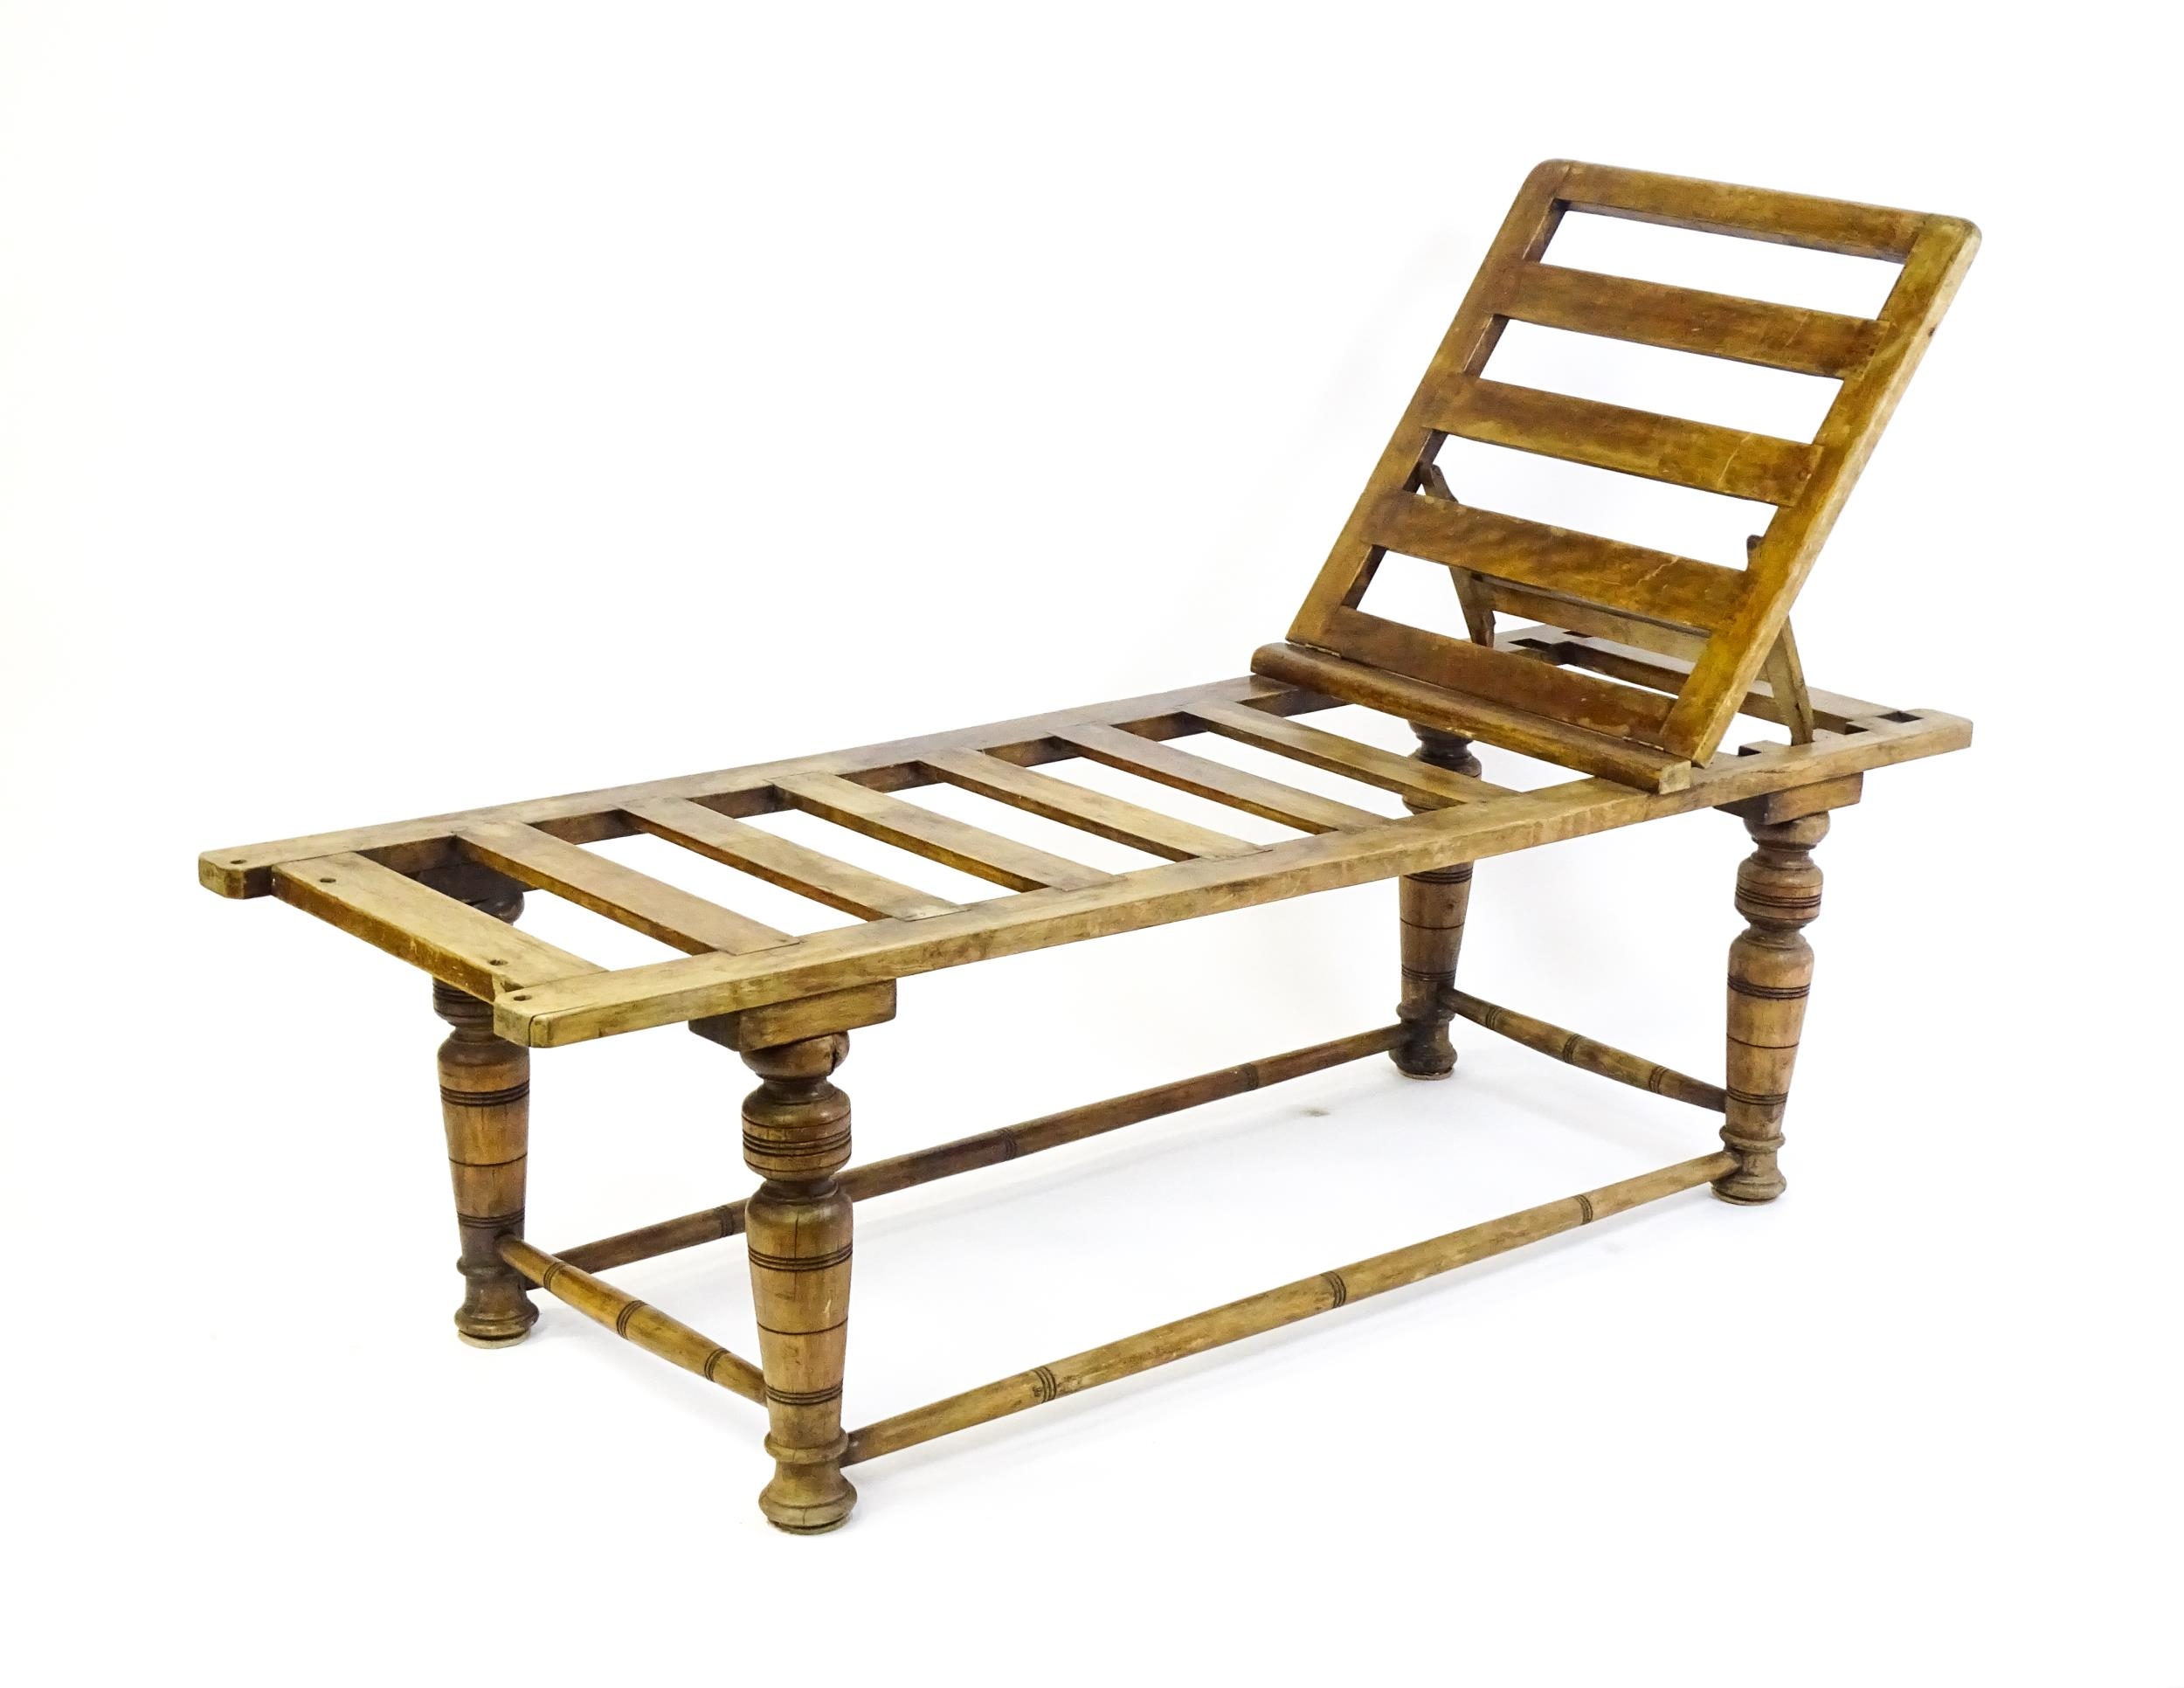 A late 19thC 'Leveson & Sons' campaign bed /day bed with a slatted bed and adjustable headrest above